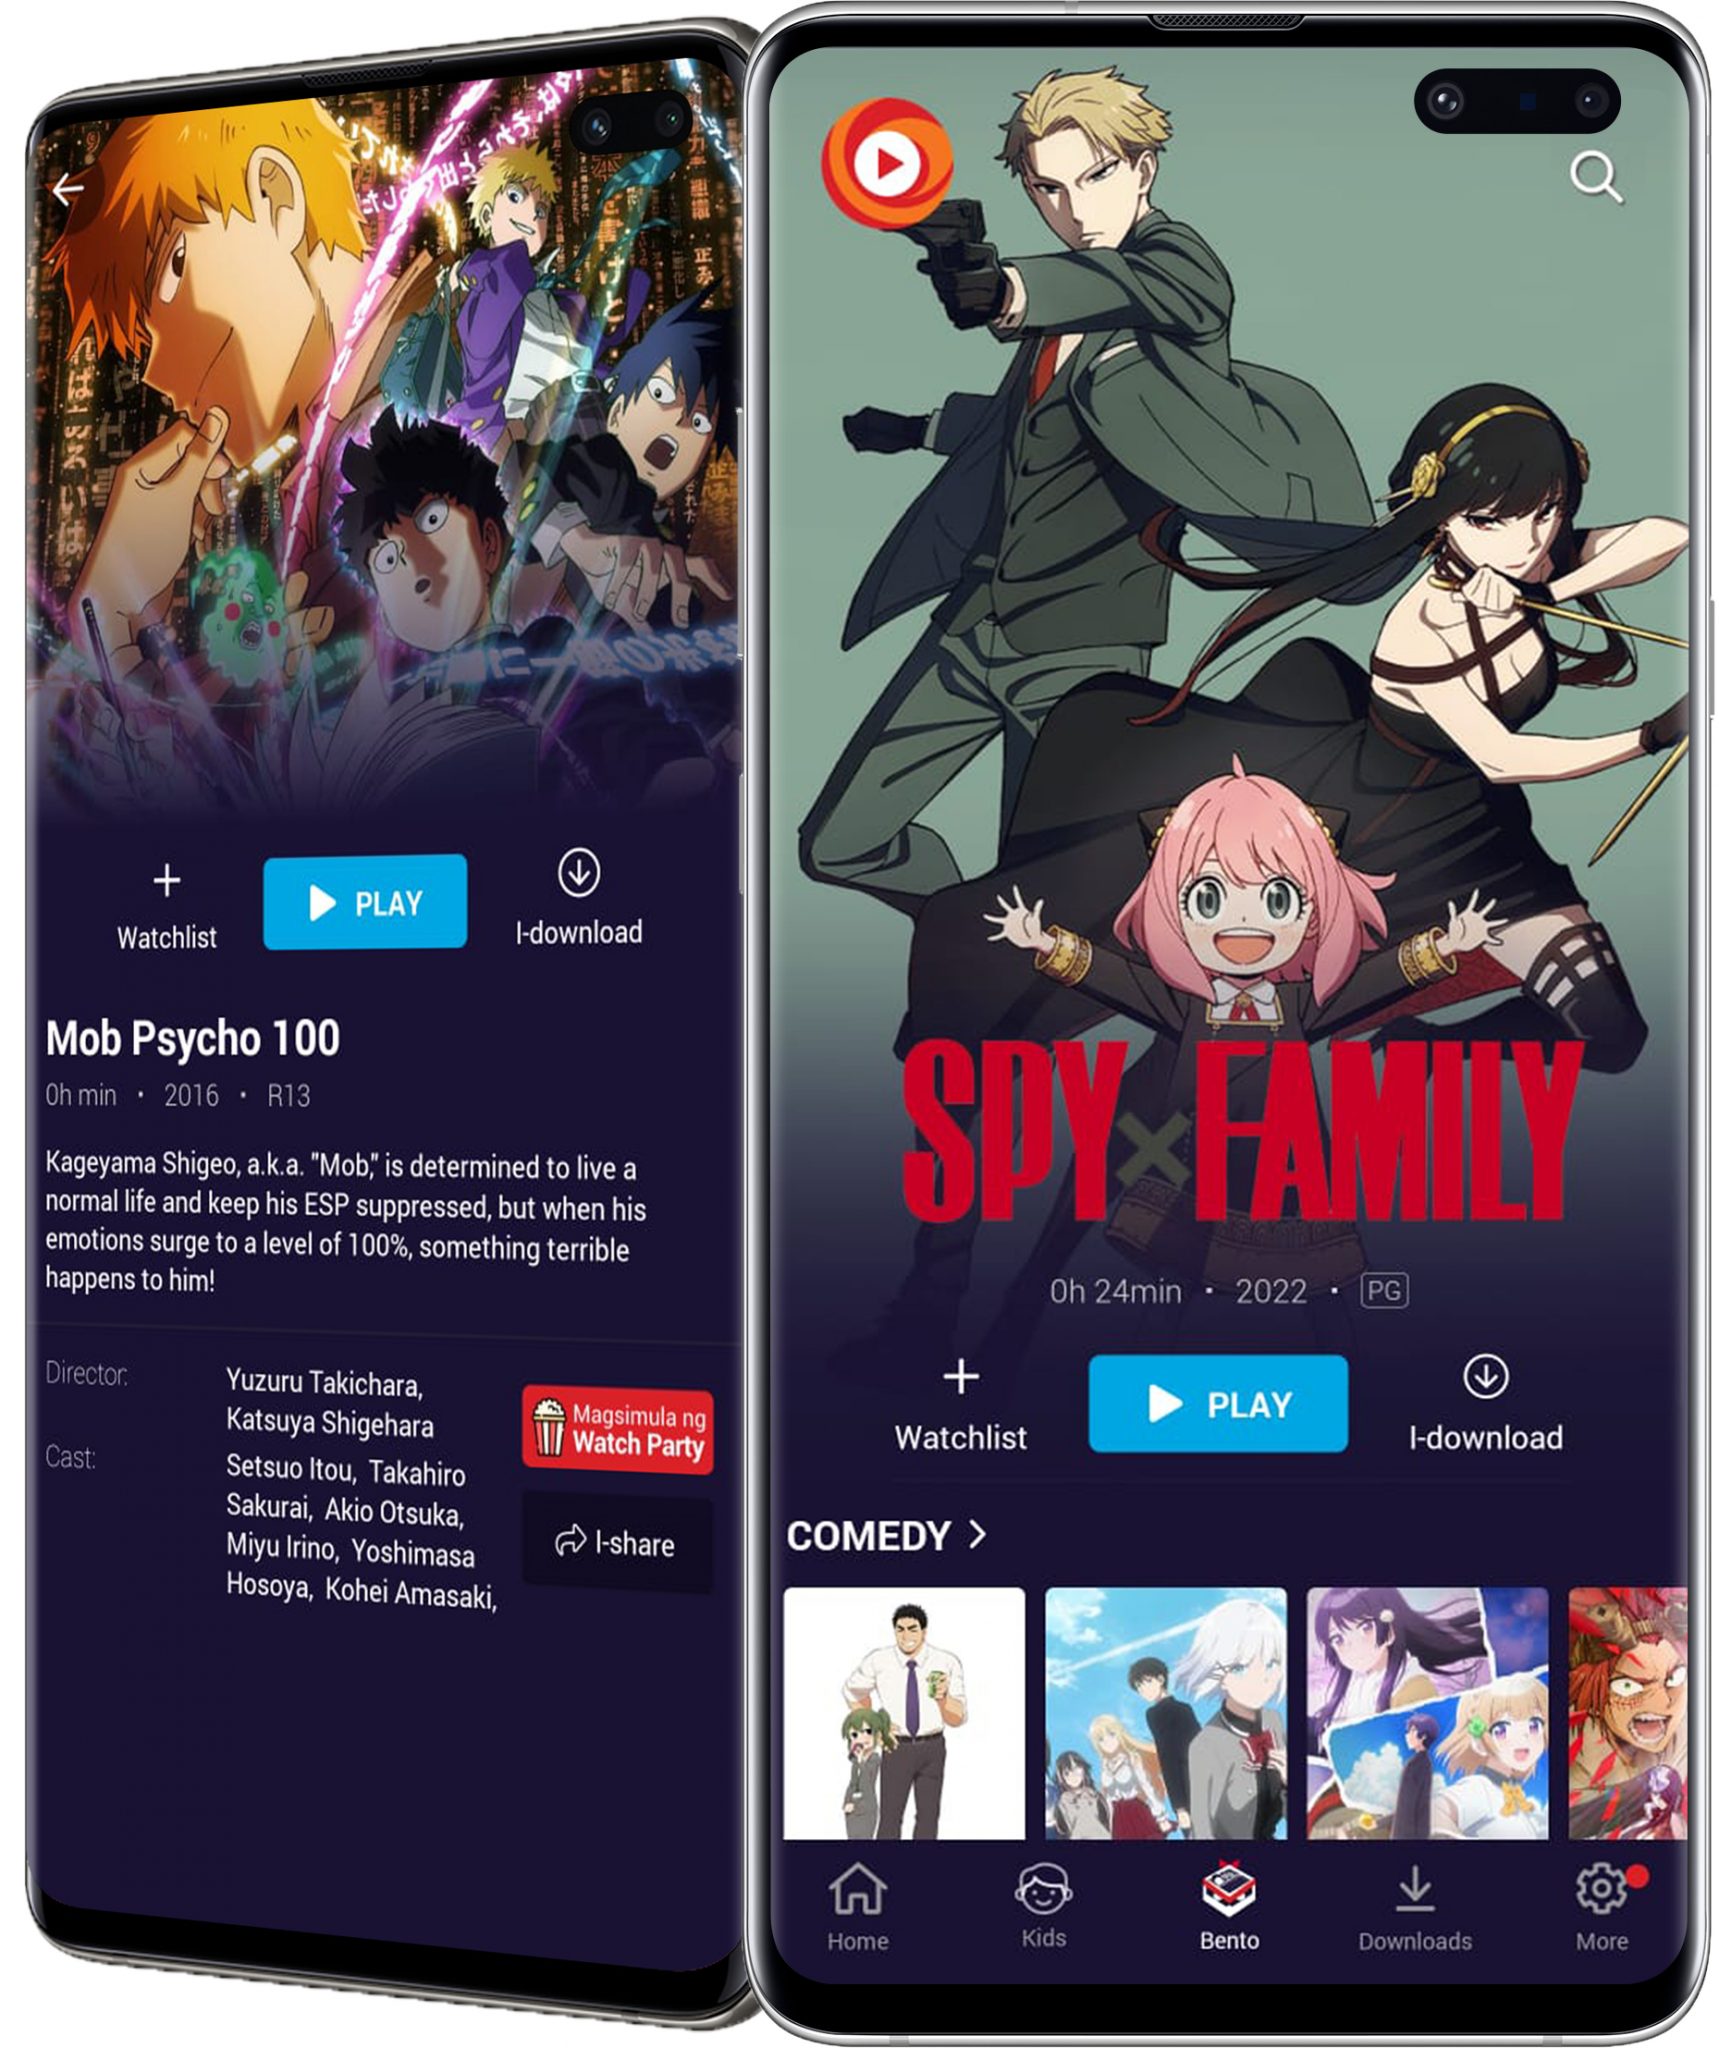 Filipino streamer PopTV expands offering with Anime - Digital TV Europe